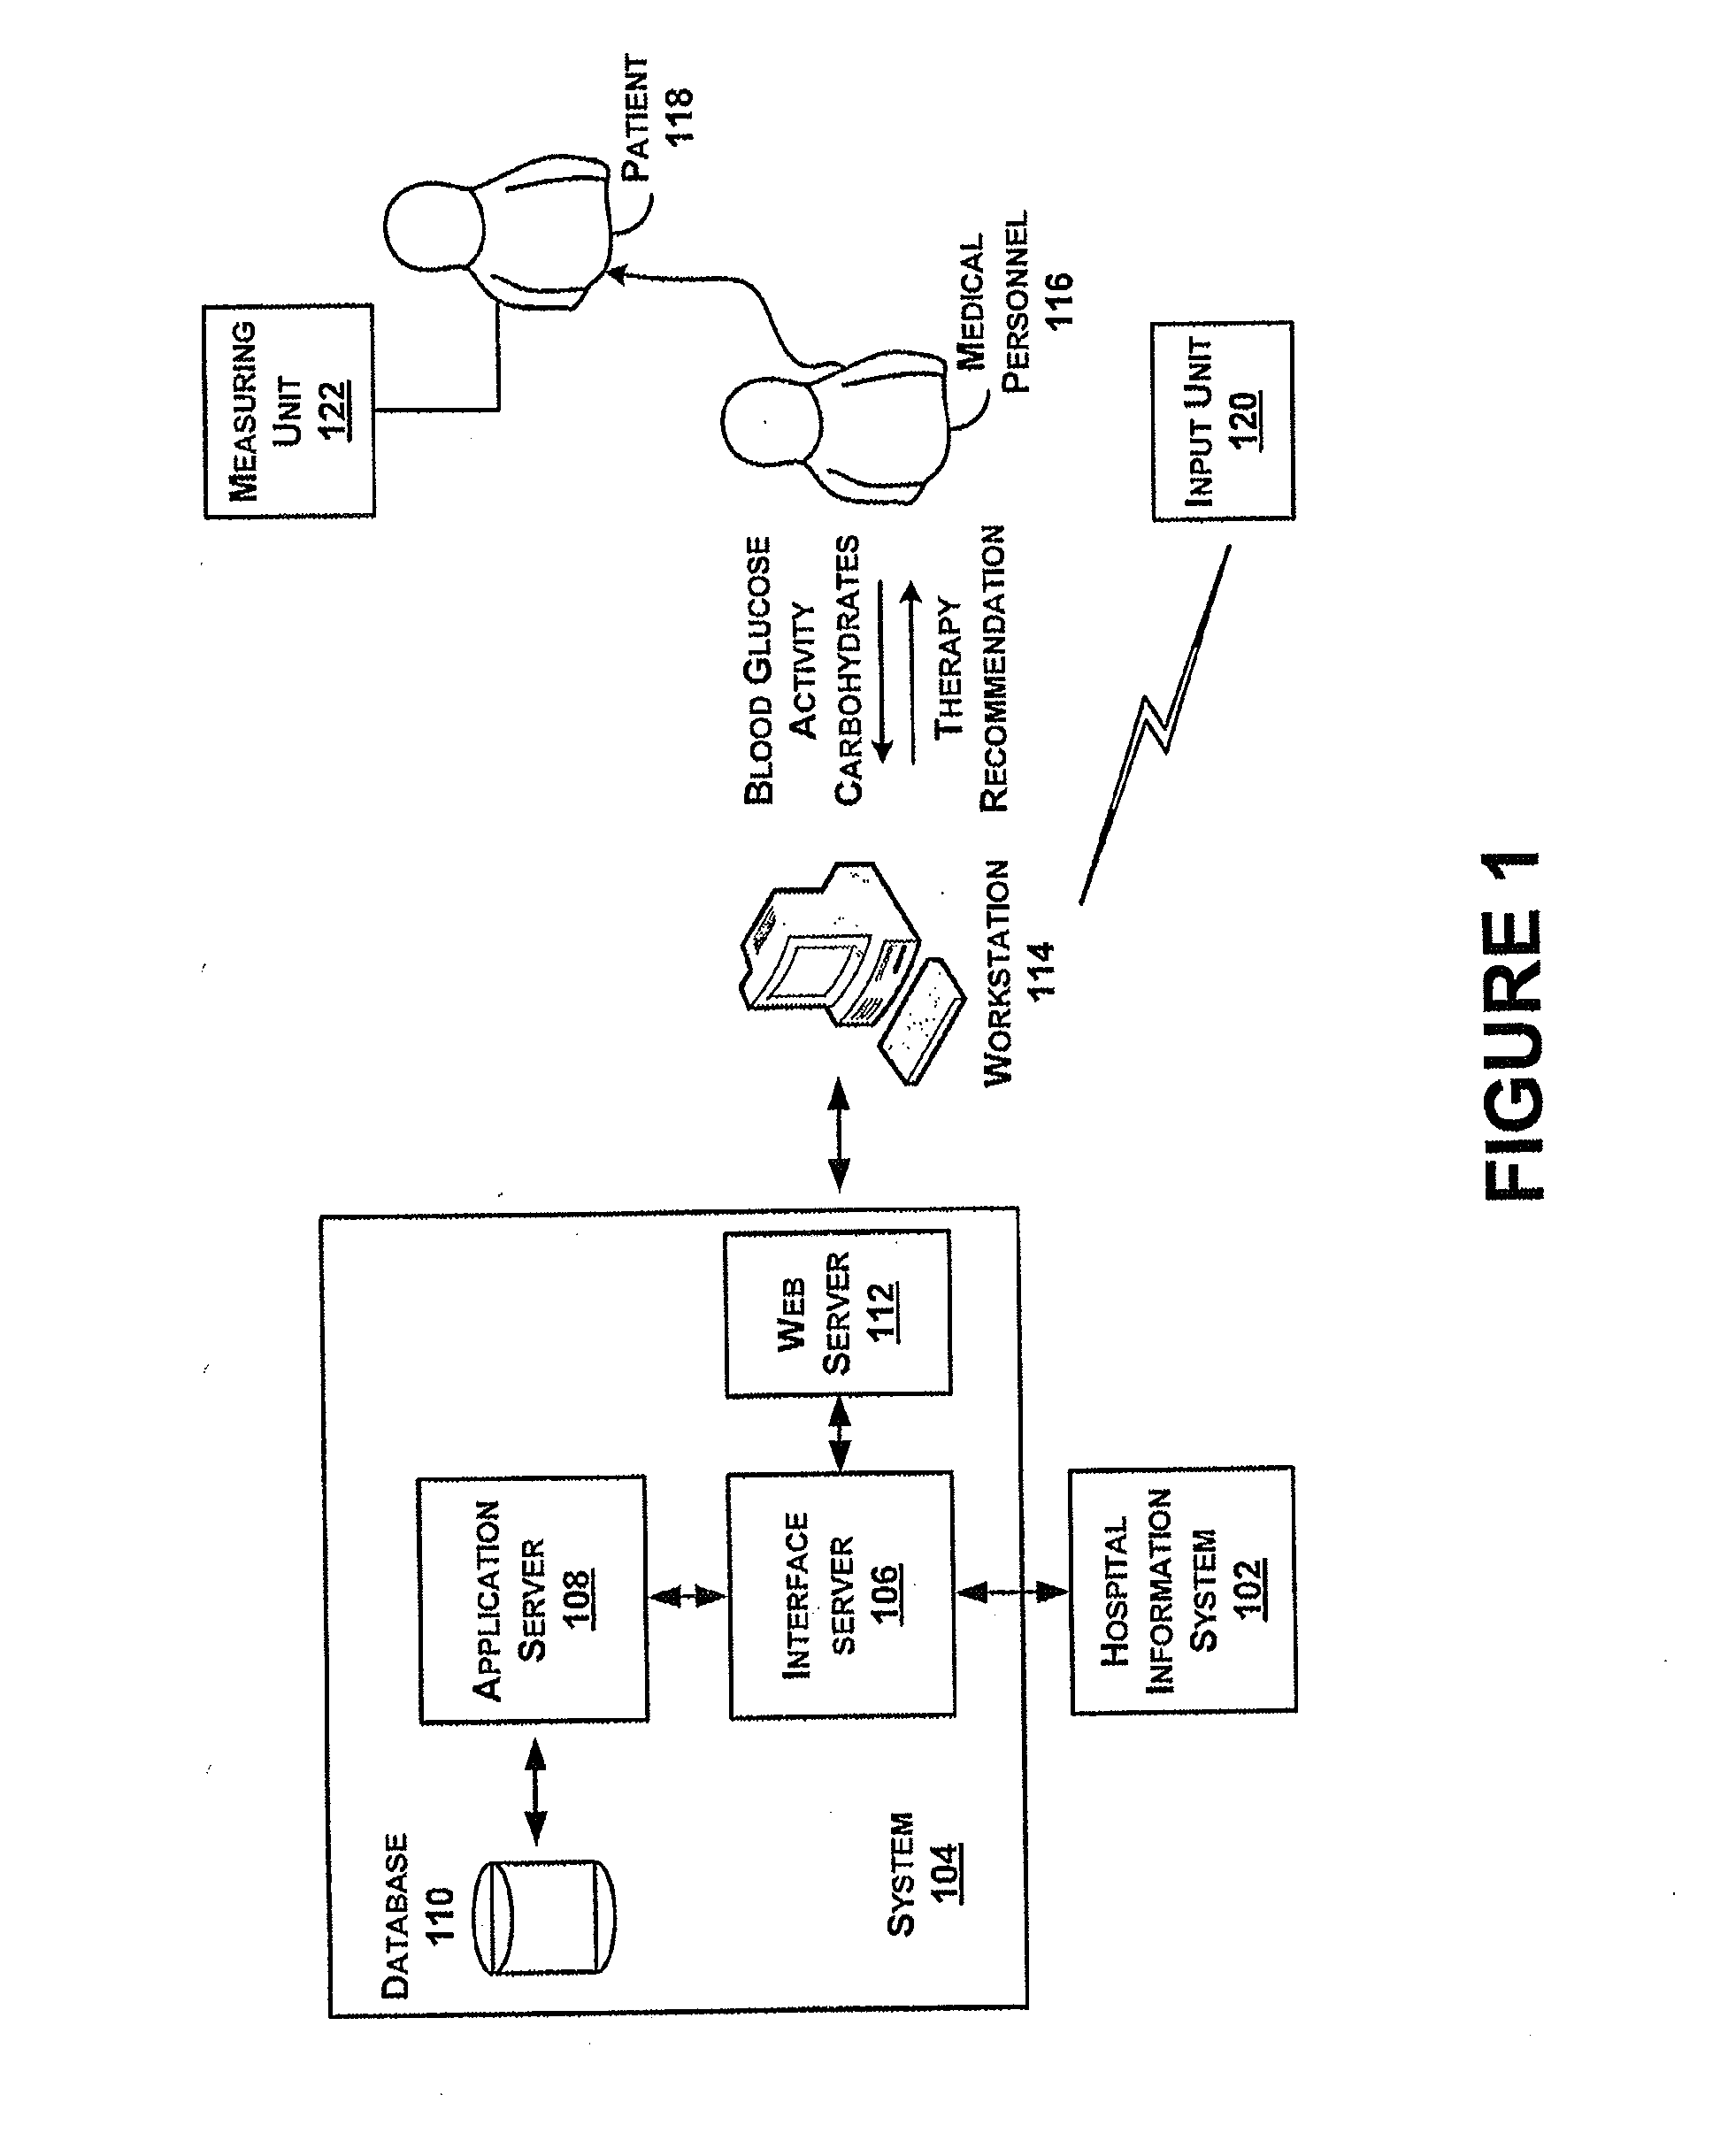 Systems and methods for determining insulin therapy for a patient